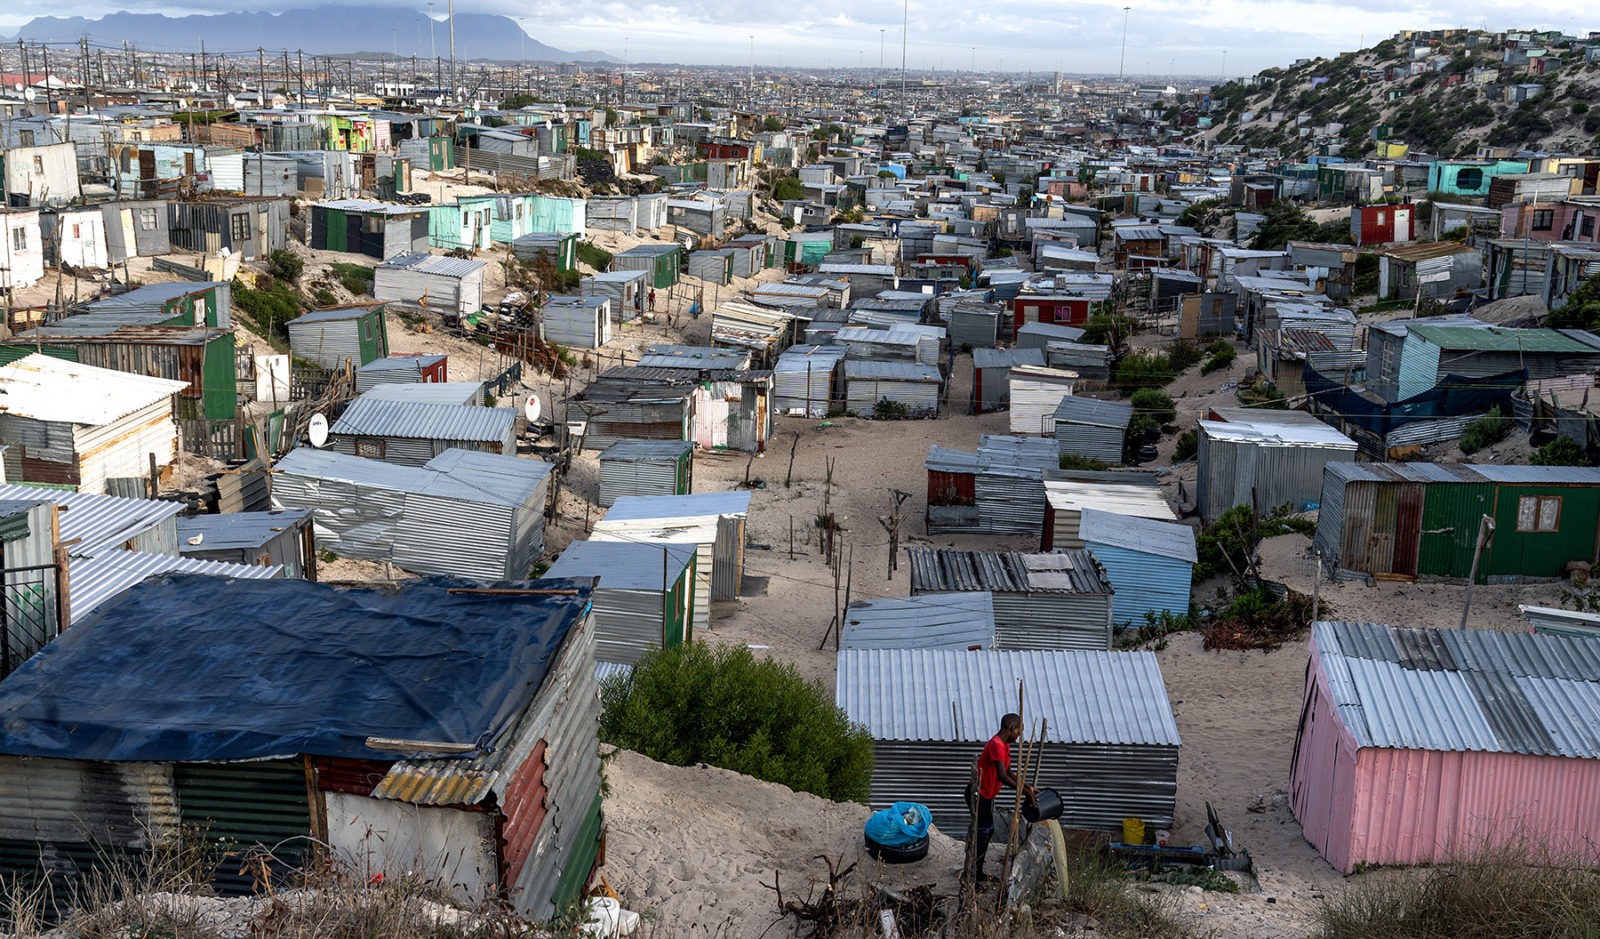 Public health and social measures are an effective but blunt tool, and implementing the same restrictions on millions of people at once, including the 200 million people living in informal settlements in Africa, can have serious social and economic consequences, says the writer.